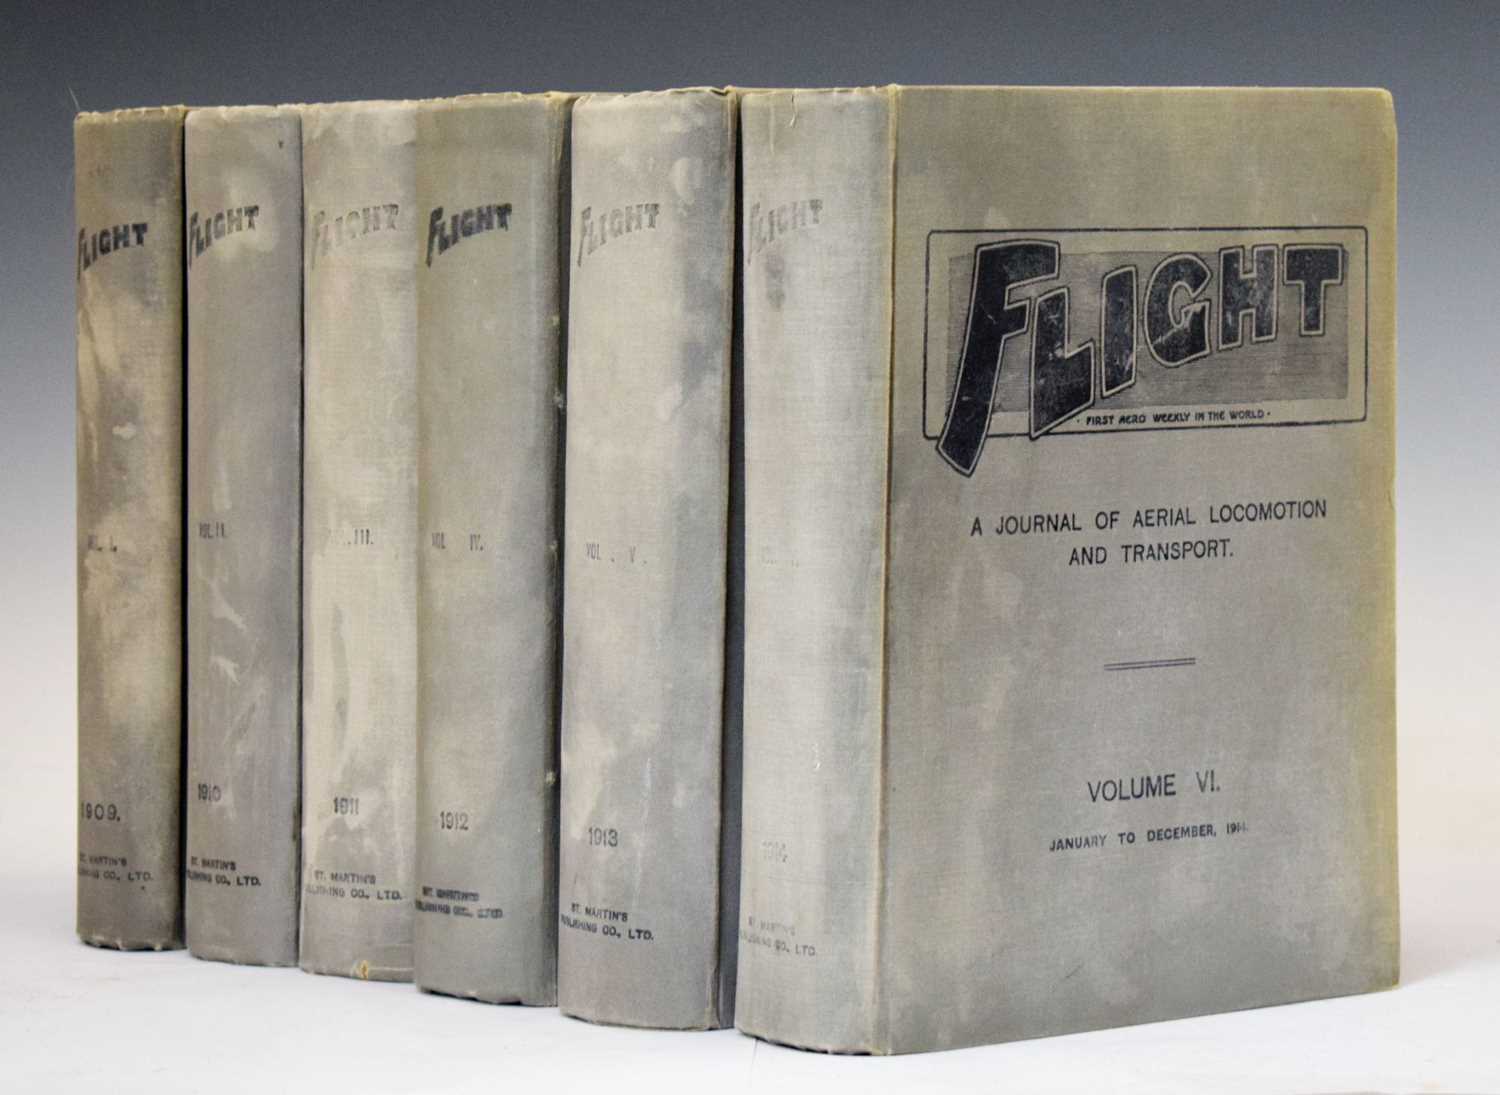 'Flight, First Aero Weekly in the World, A Journal of Aerial Locomotion and Transport', Volumes I-VI